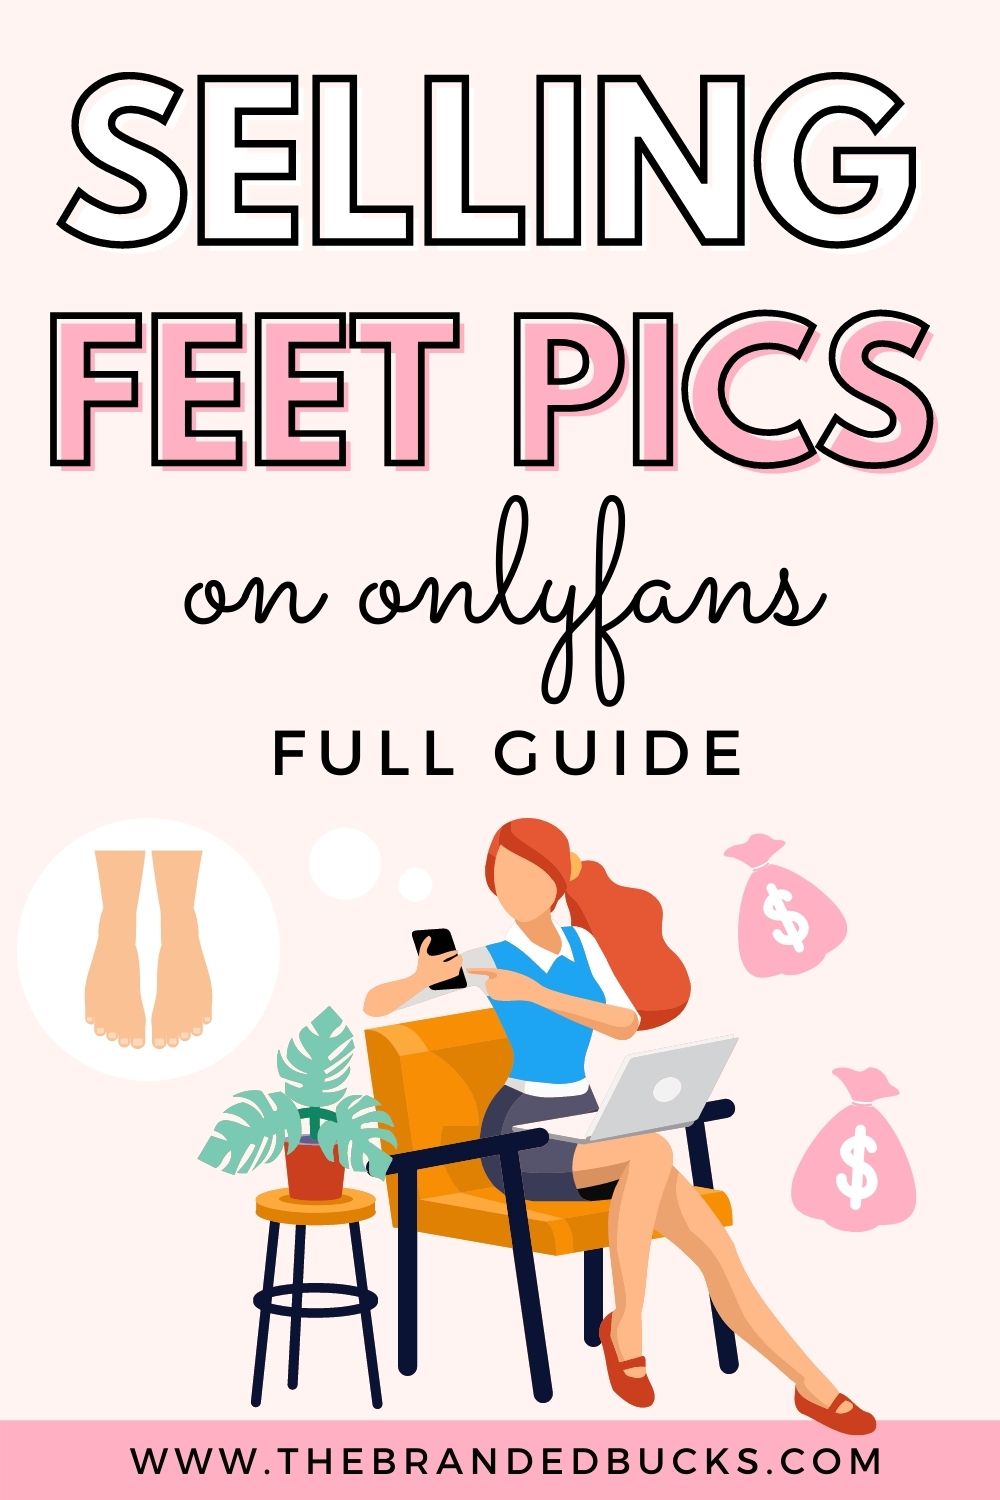 How to start an onlyfans for feet pics